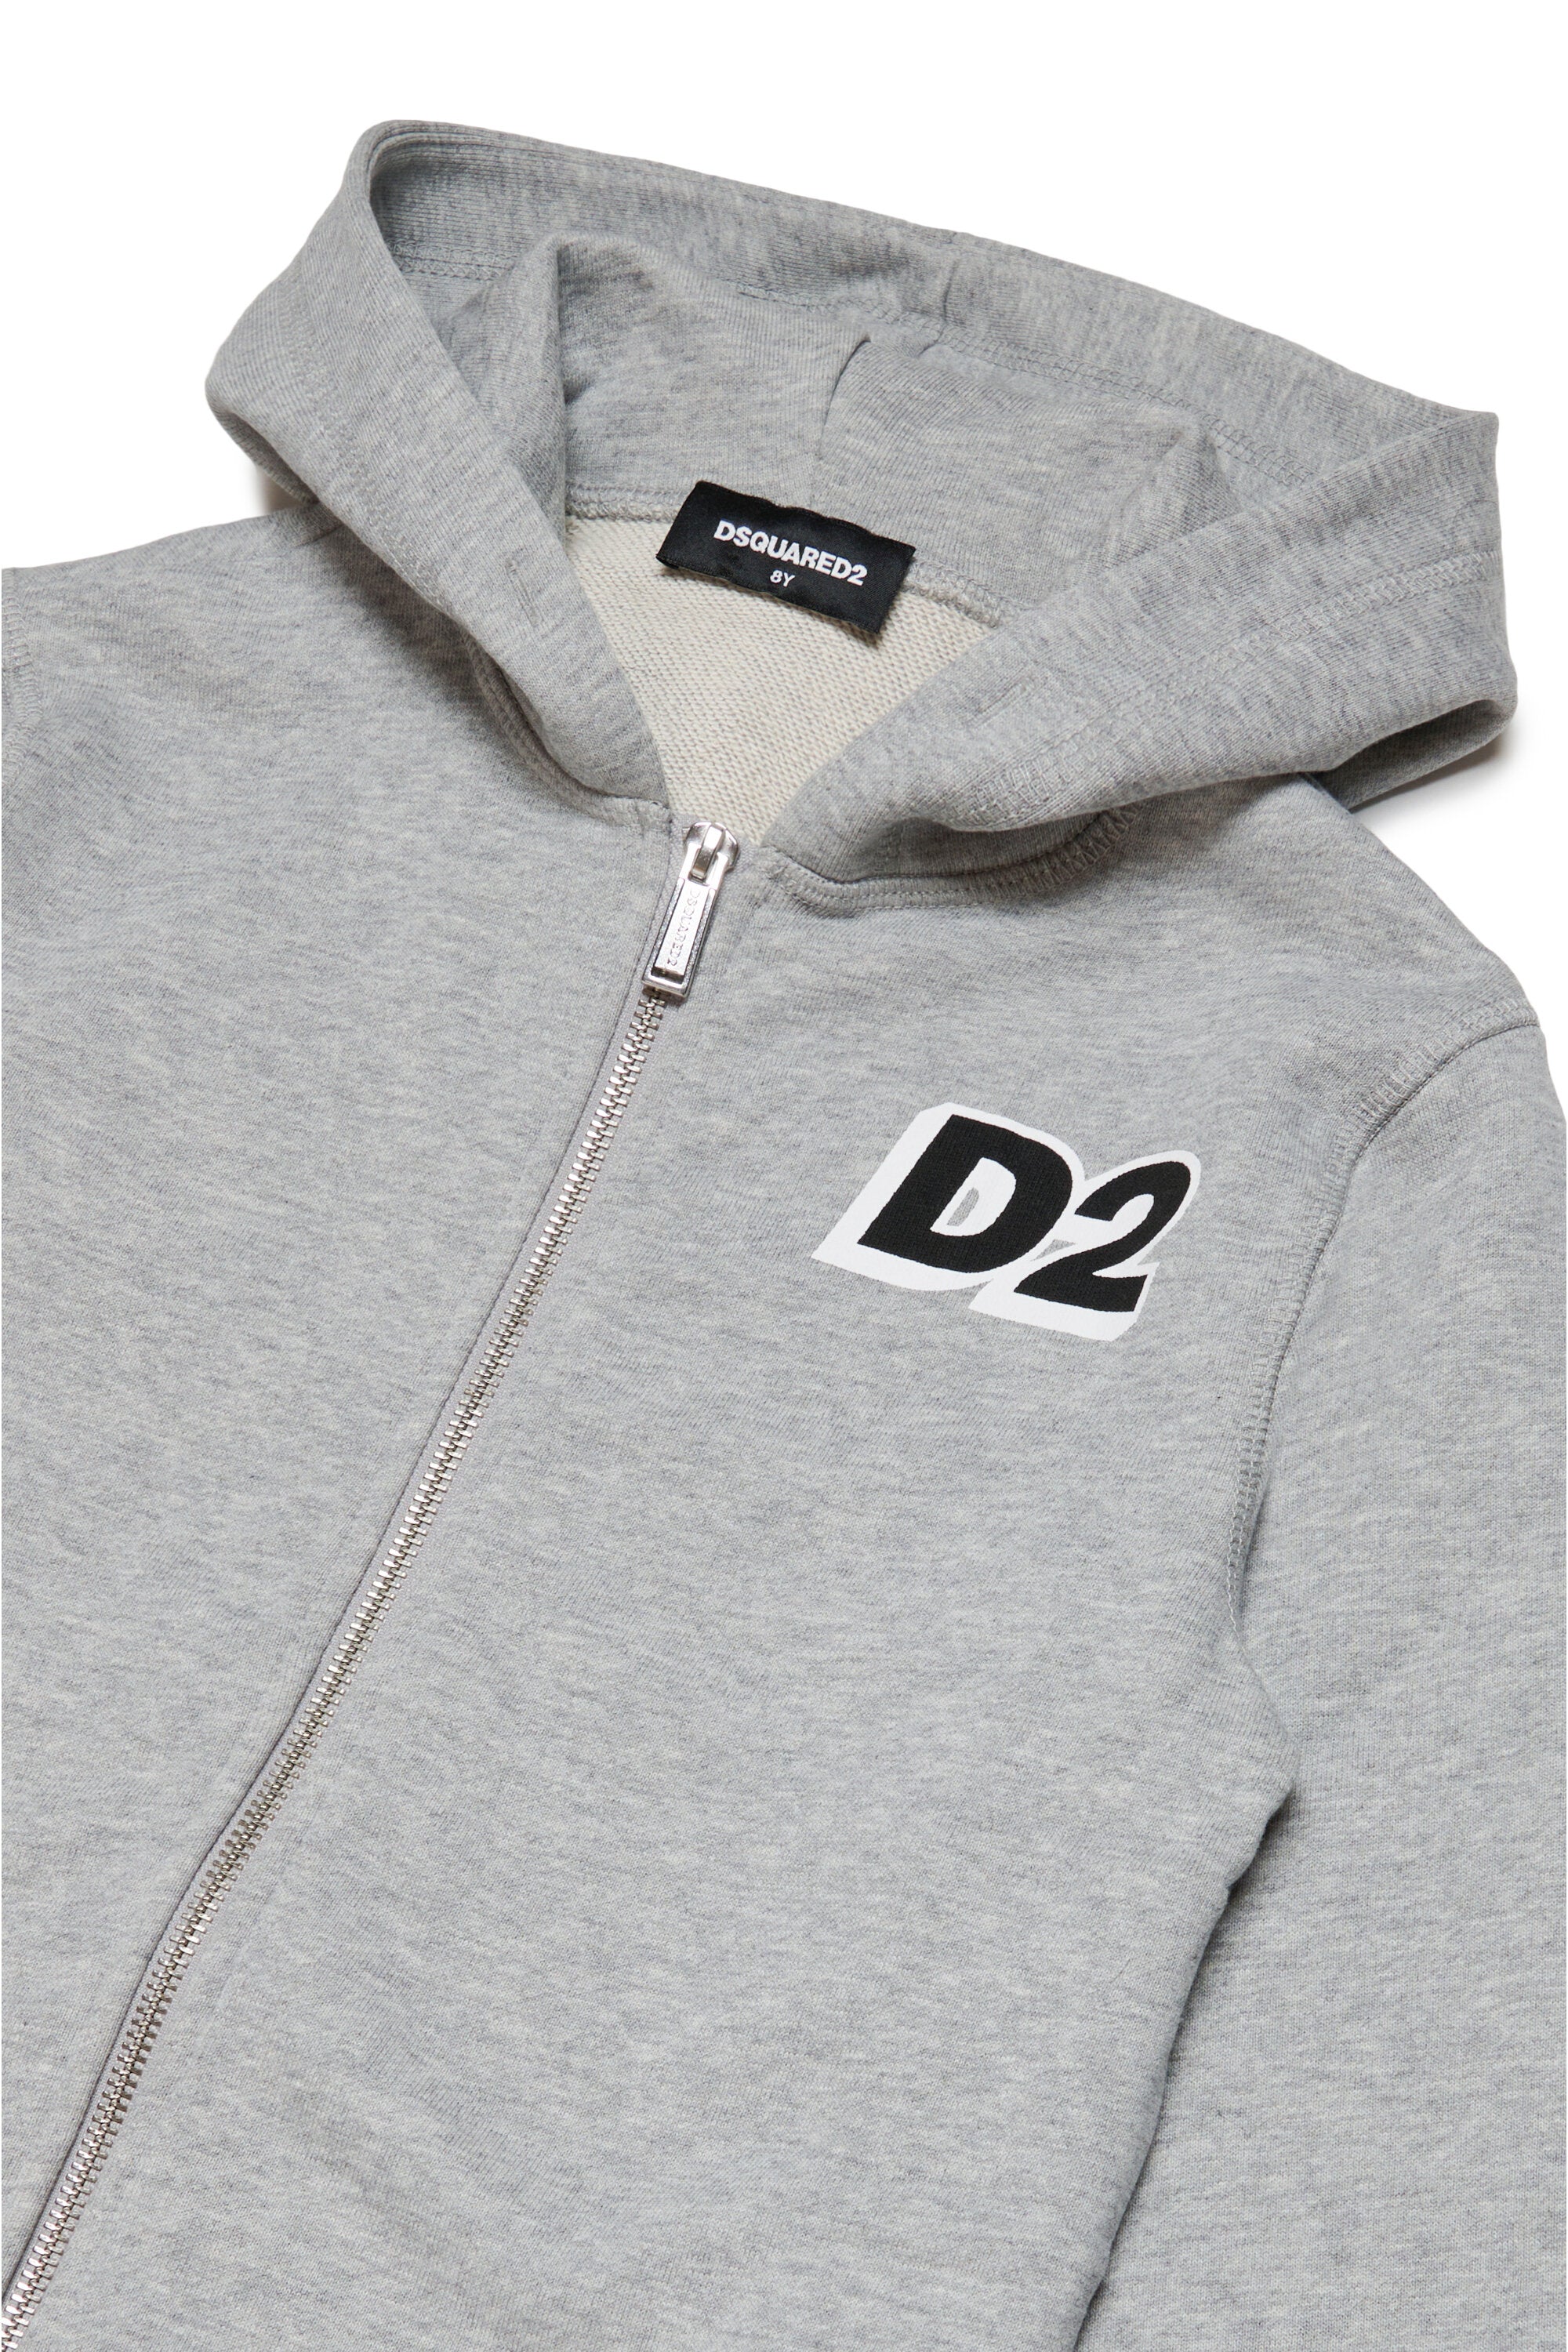 Cotton mélange loungewear hooded sweatshirt with zip and D2 logo